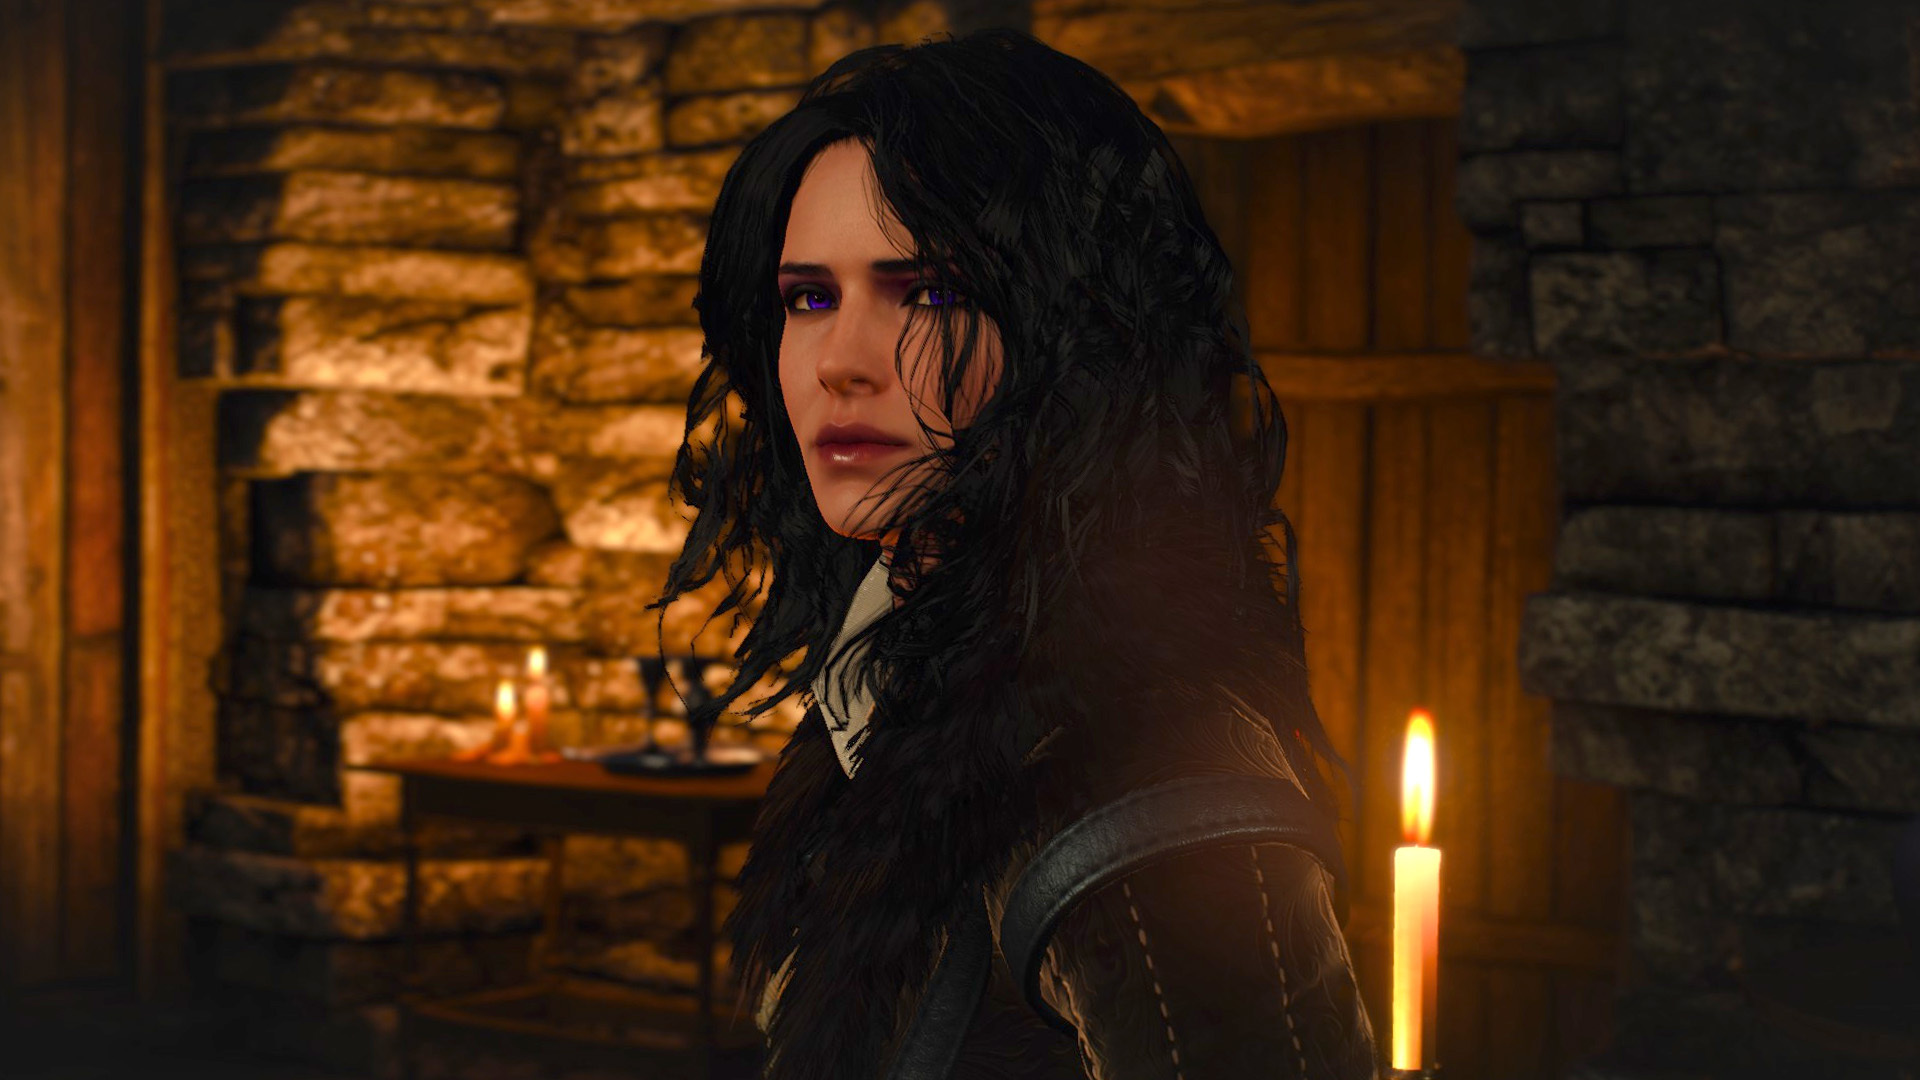 The witcher 3 alternative look for yennefer фото 27